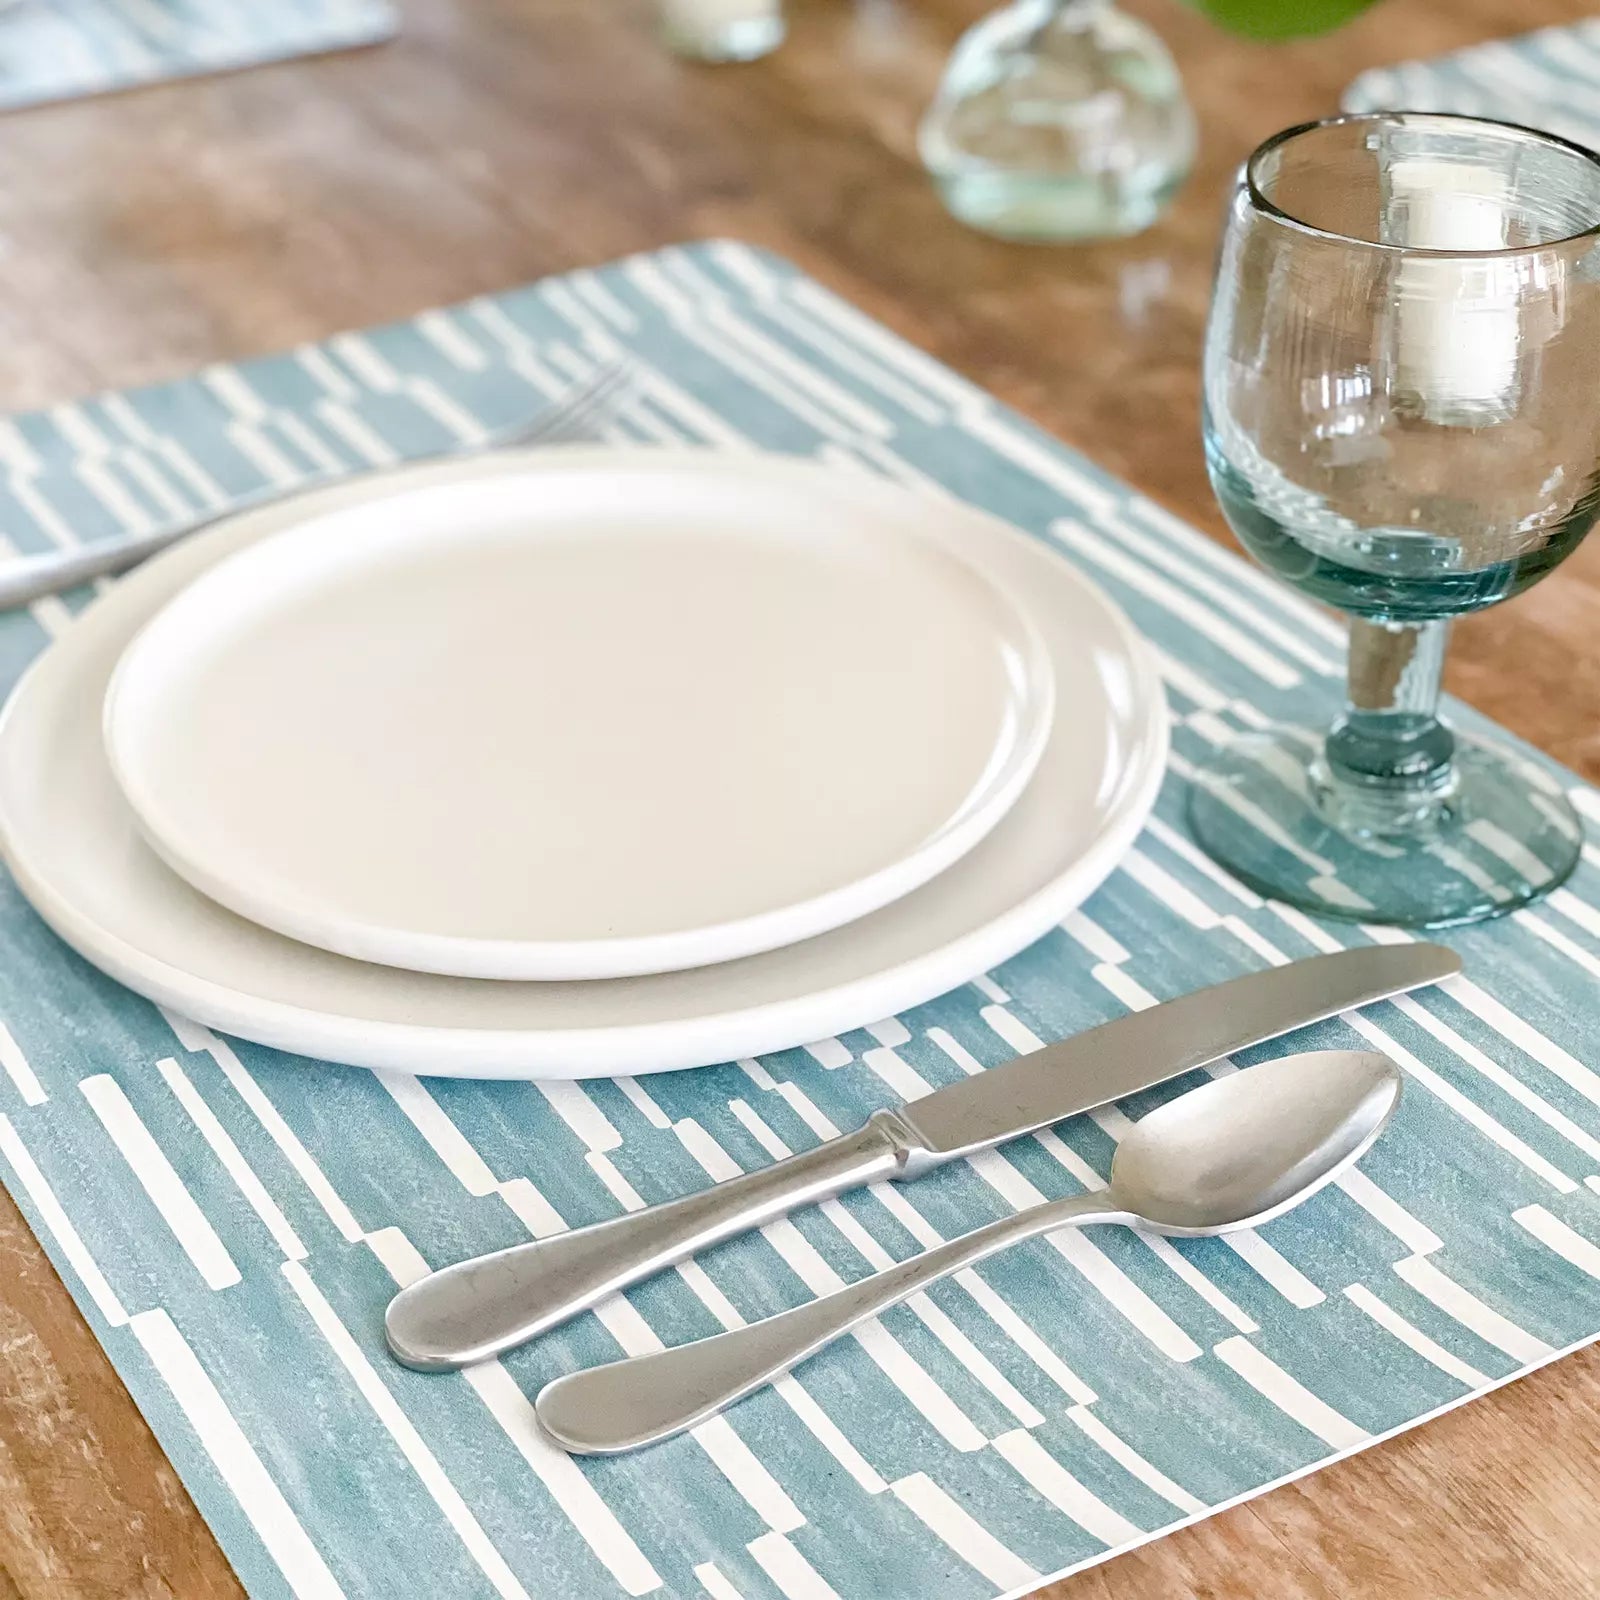 Nara Turquoise Blue Striped place mat at table setting with plate, napkin and silverware